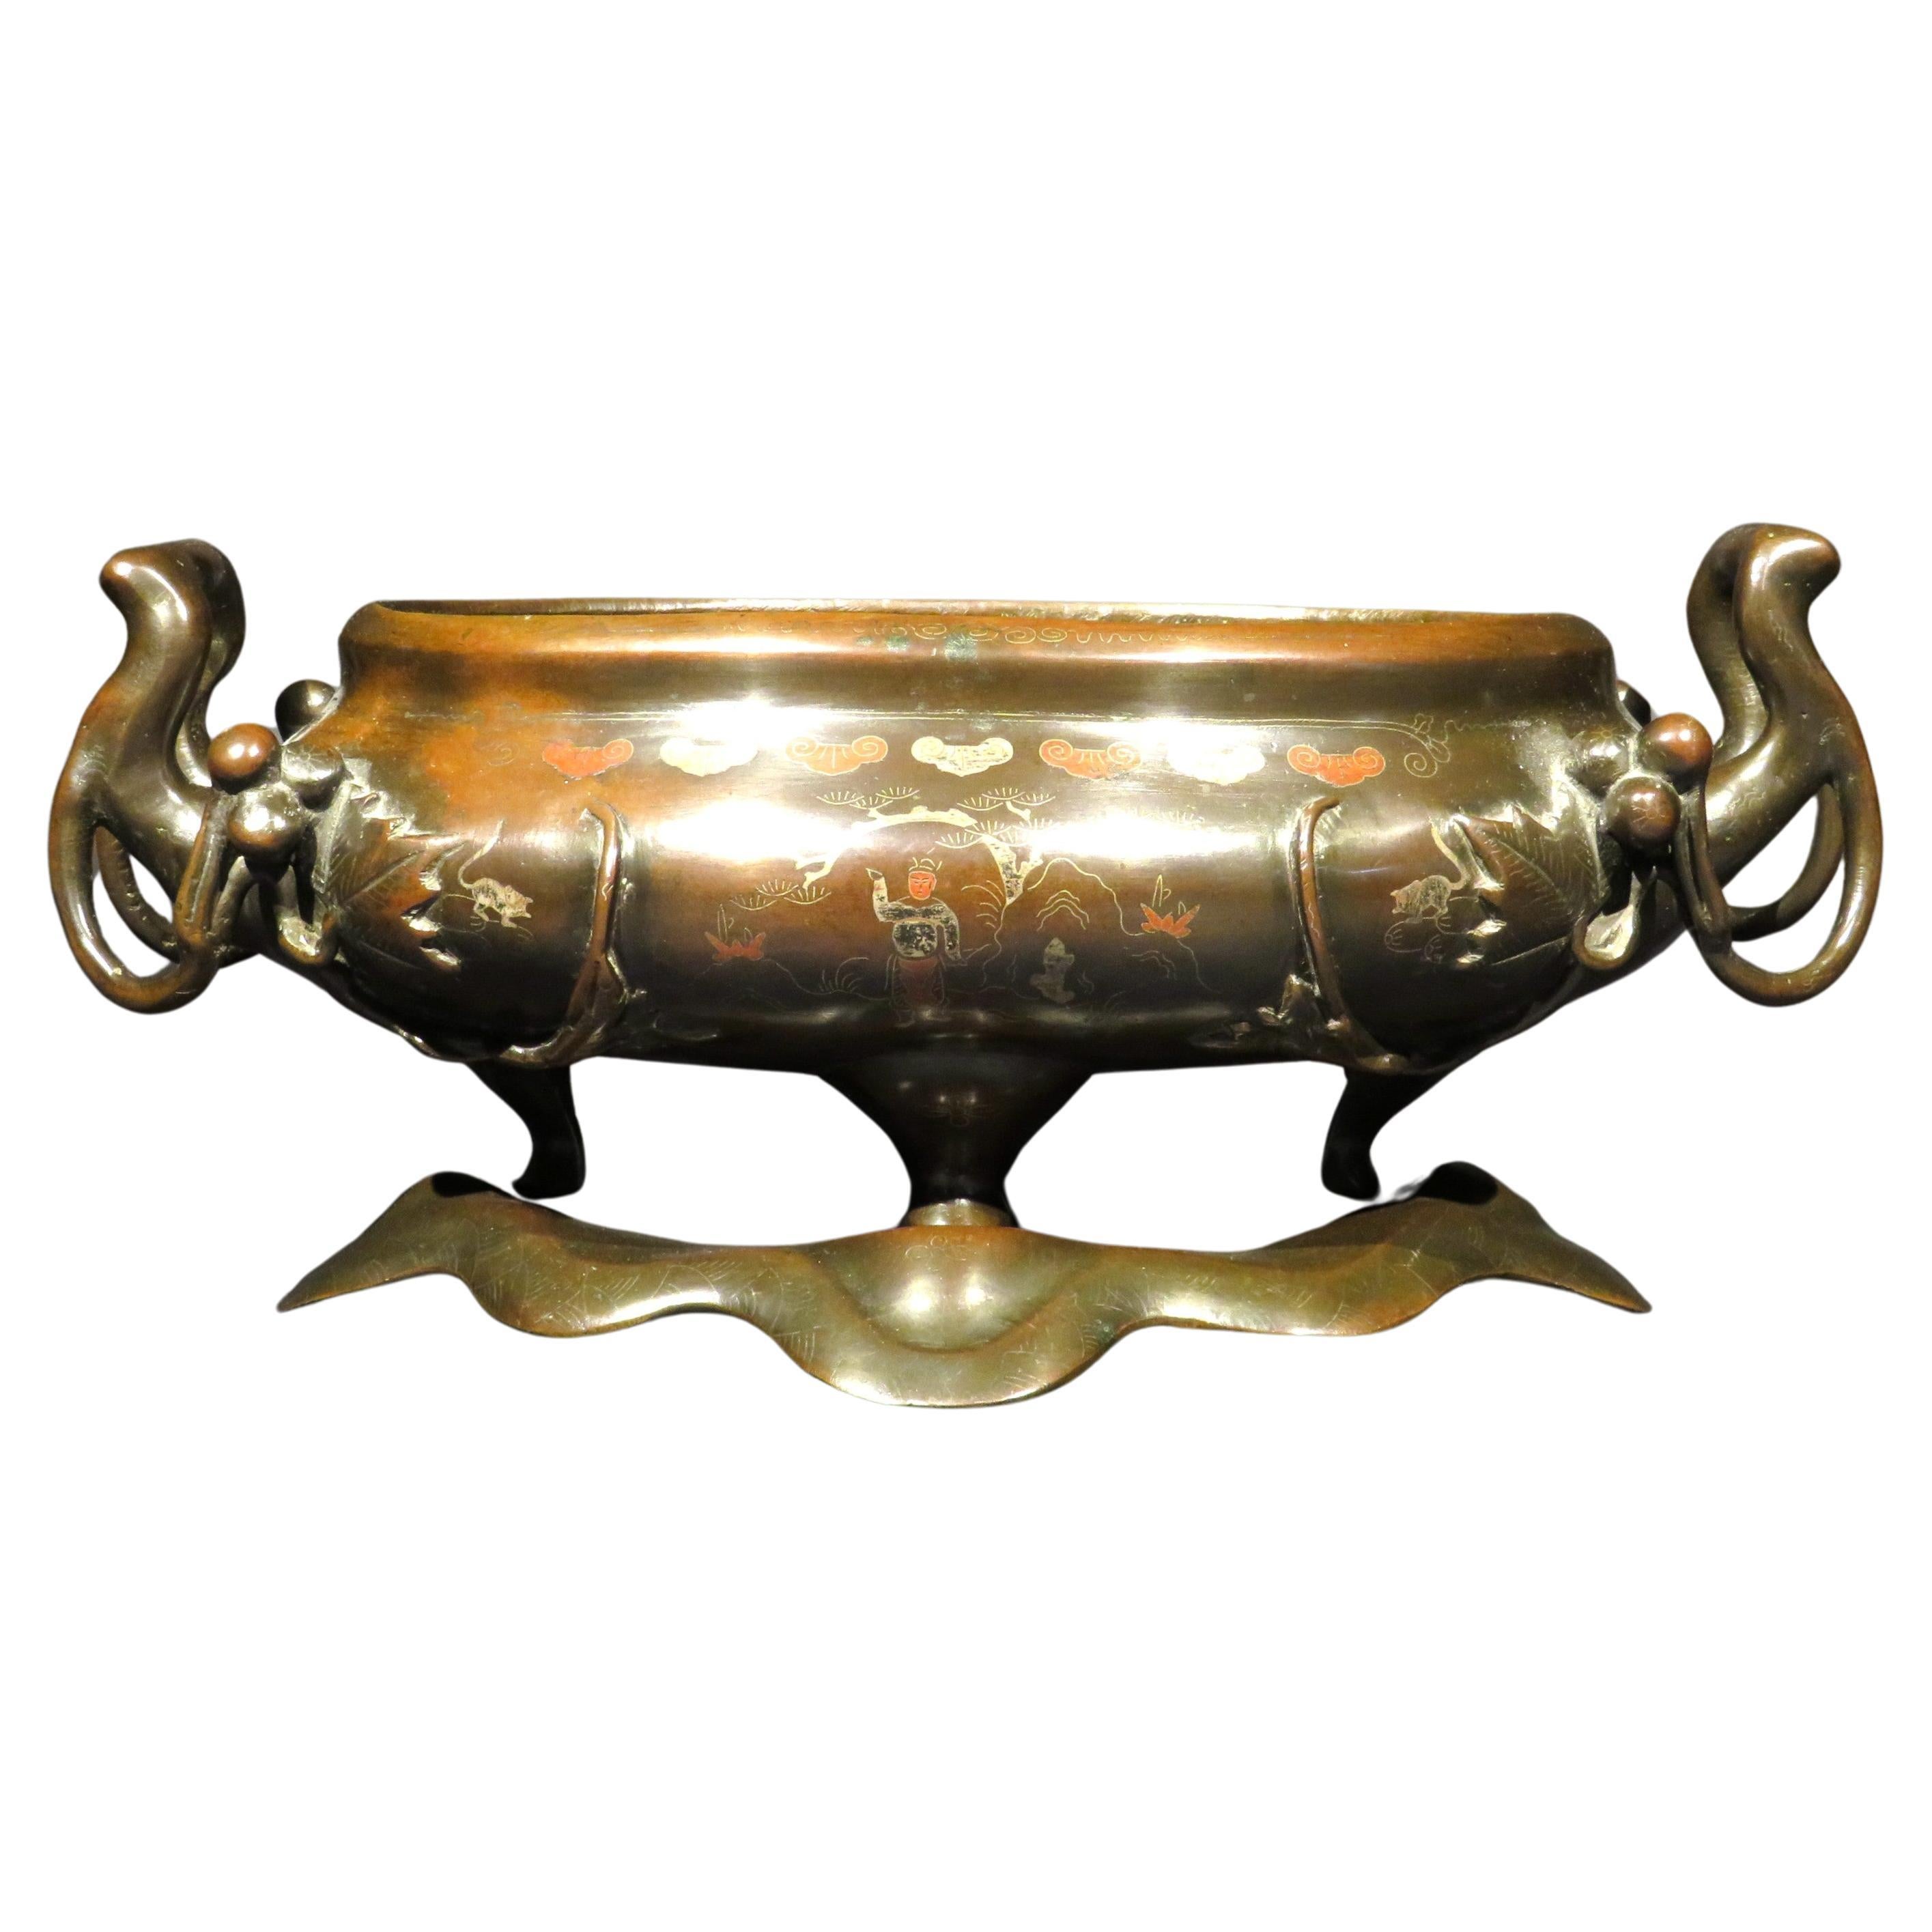 A Very Fine Japanese Mixed Metal Bronze Doban / Suiban, Meiji Period (1868-1912) For Sale